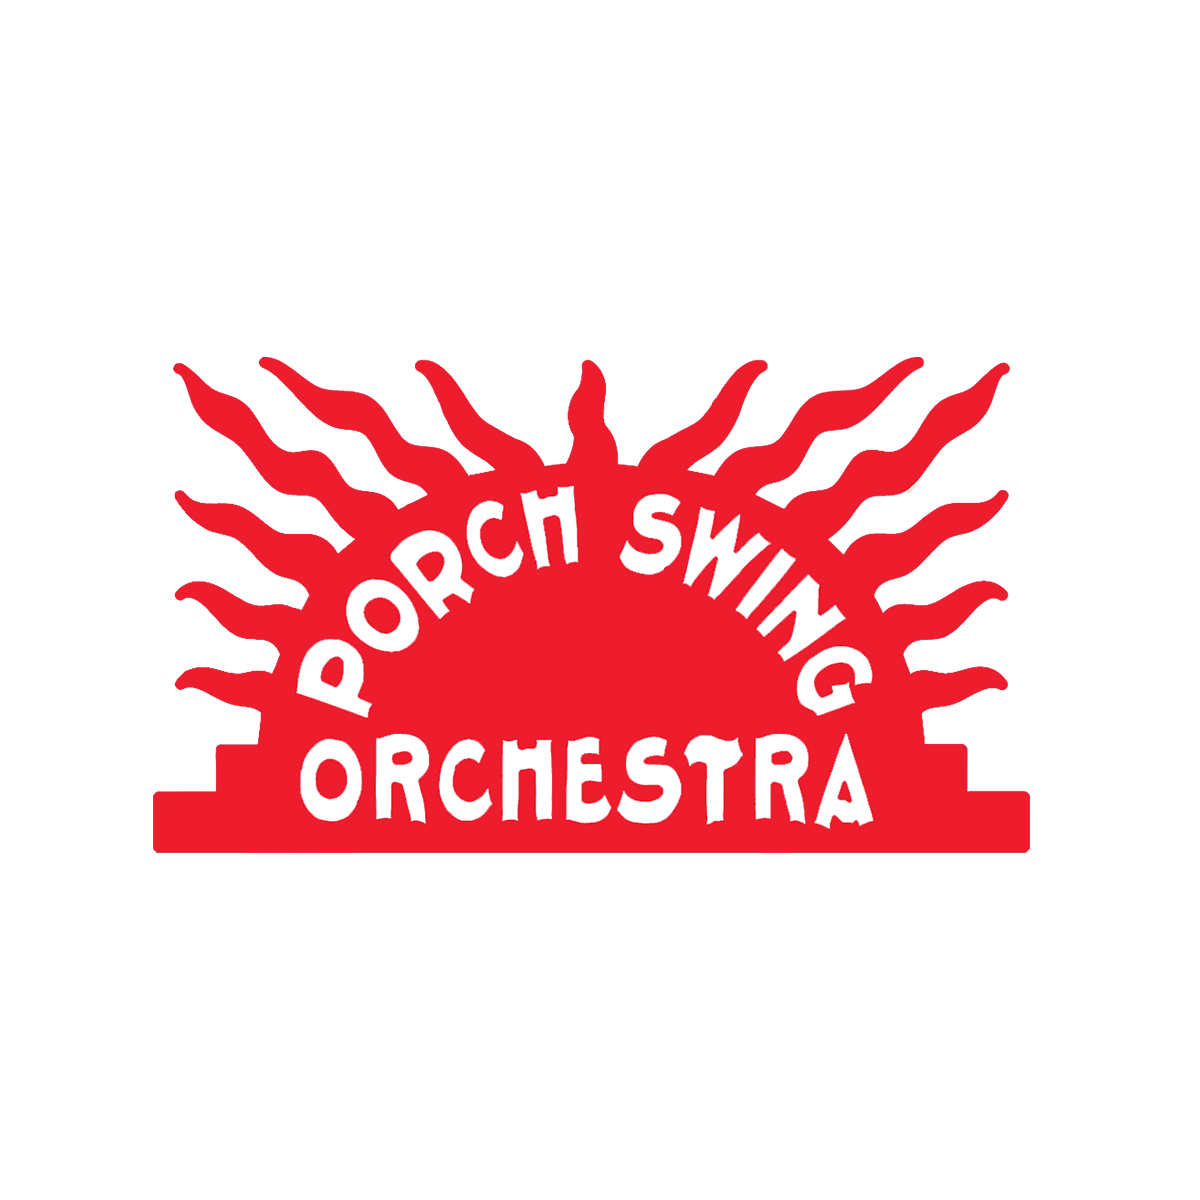 Artwork for Porch Swing Orchestra